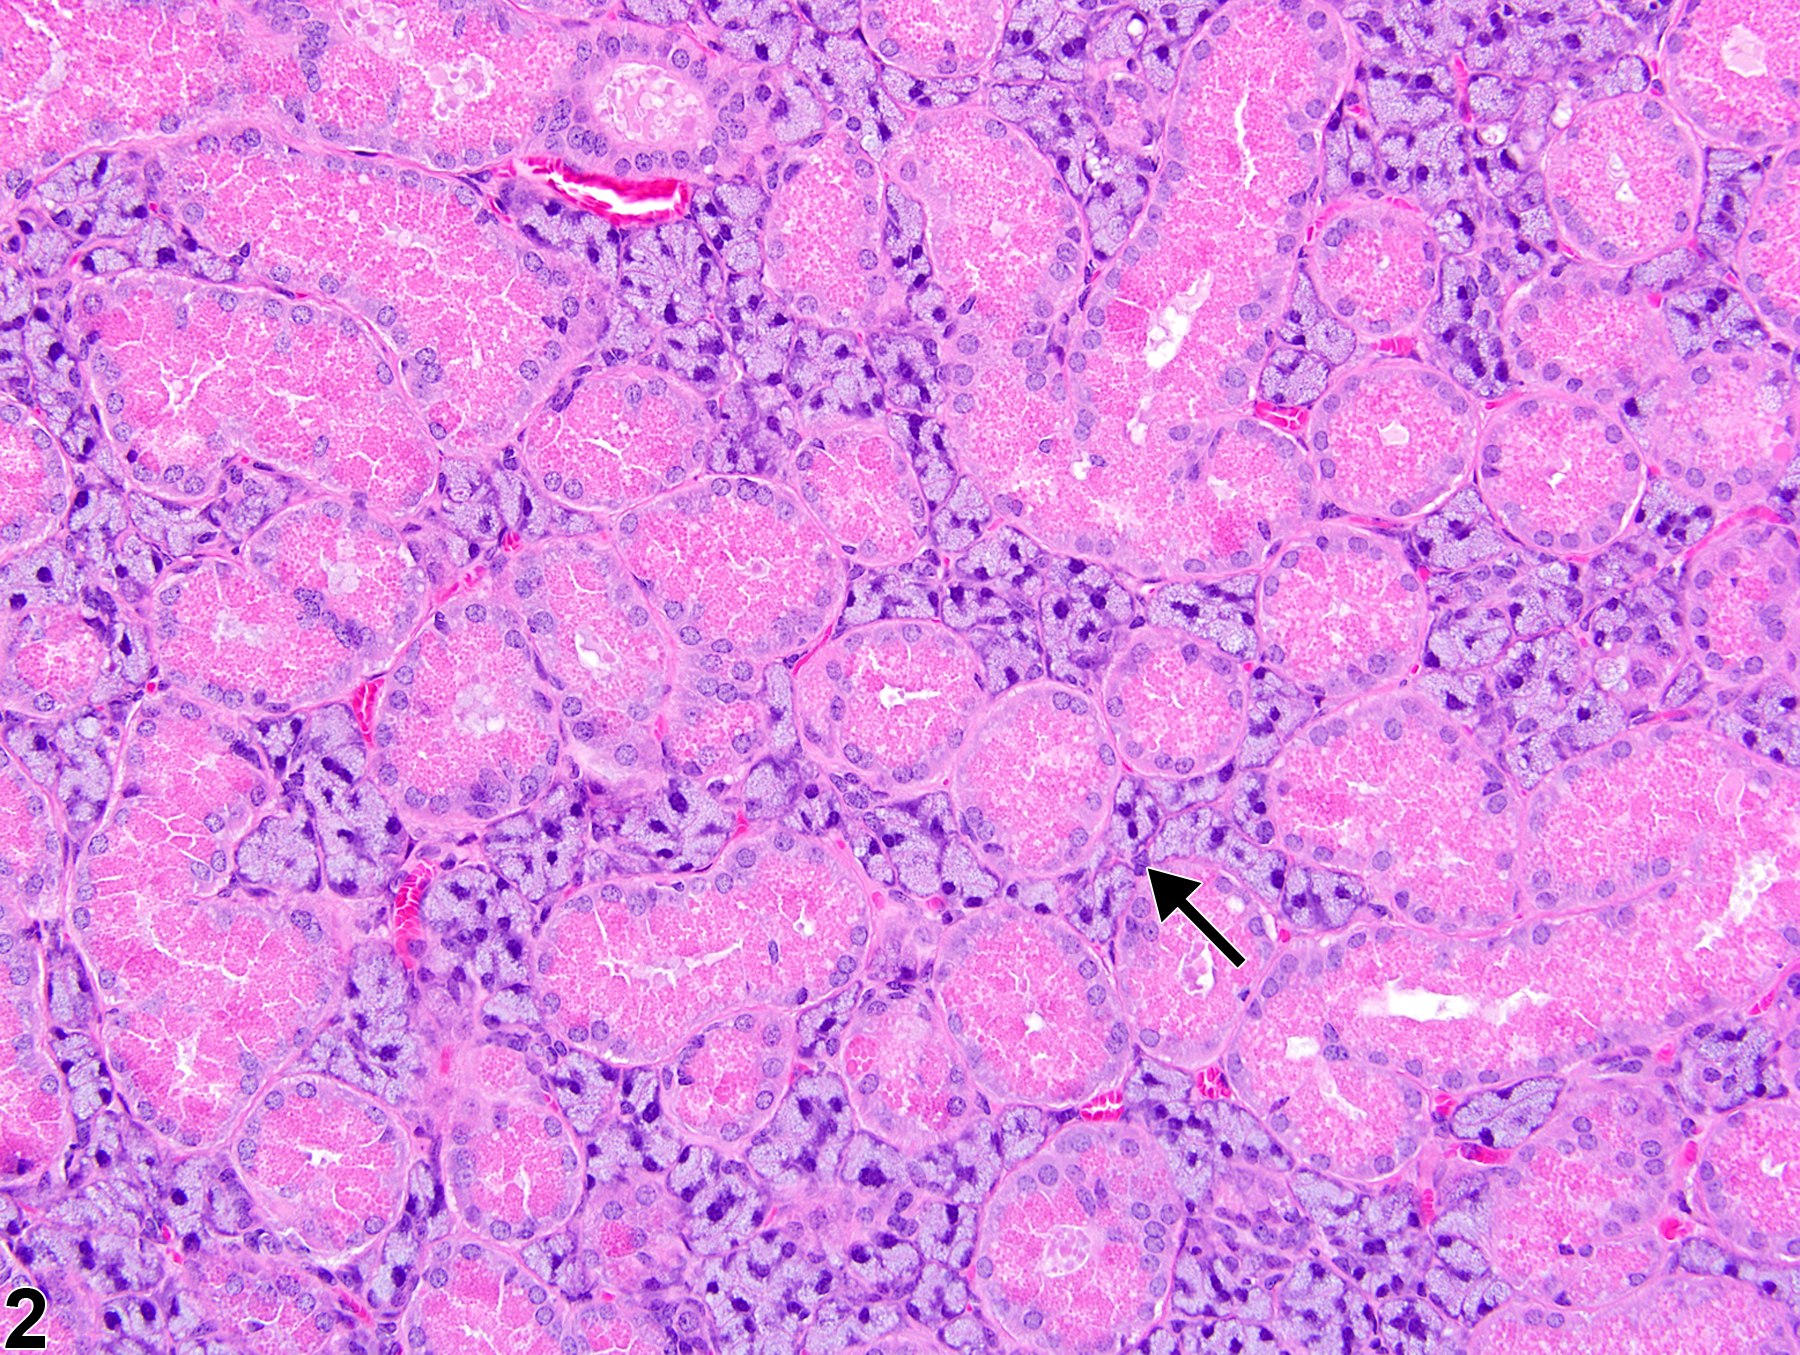 Image of cytoplasmic alteration in the submandibular salivary gland duct from a male B6C3F1 mouse in a chronic study